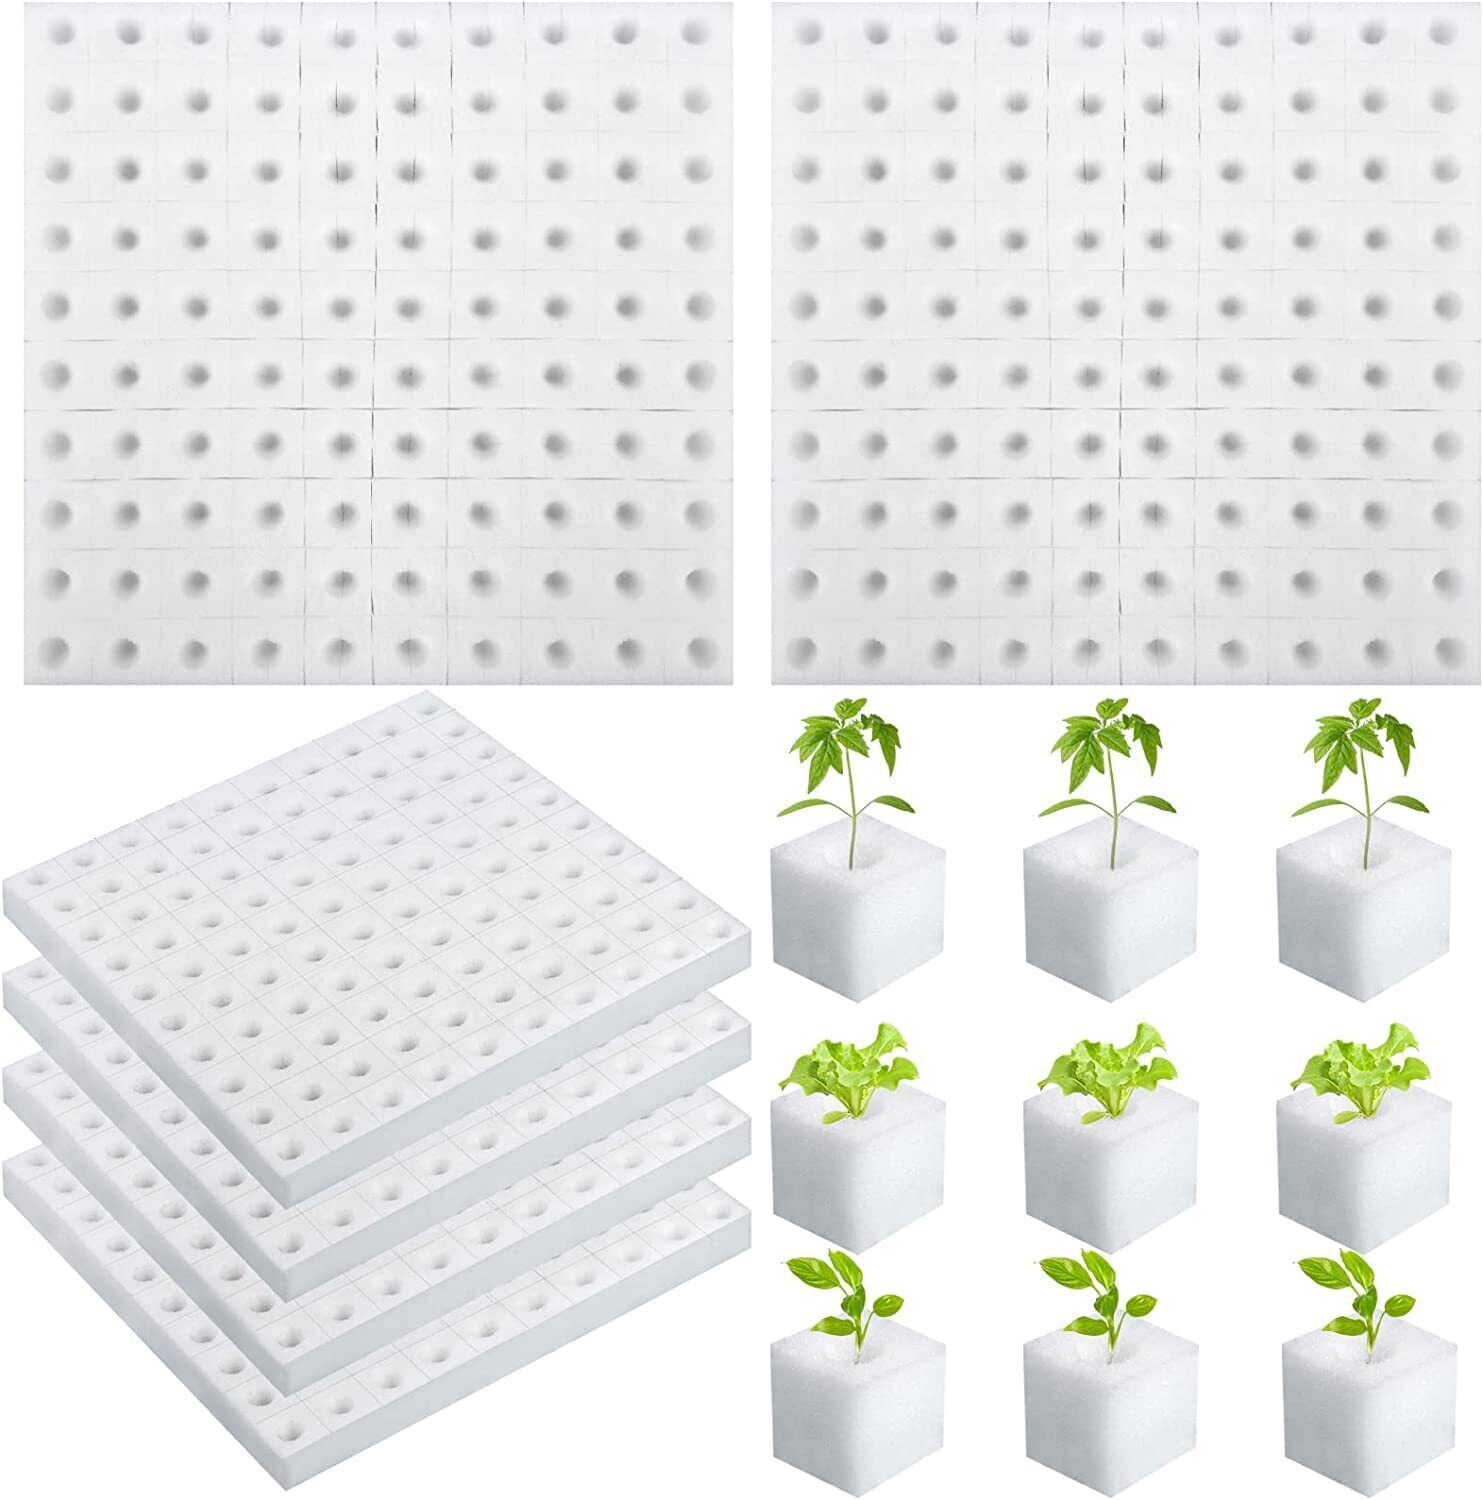 600 Pcs Hydroponic Sponges Planting Gardening Tool Soilless Cultivation Seedl...